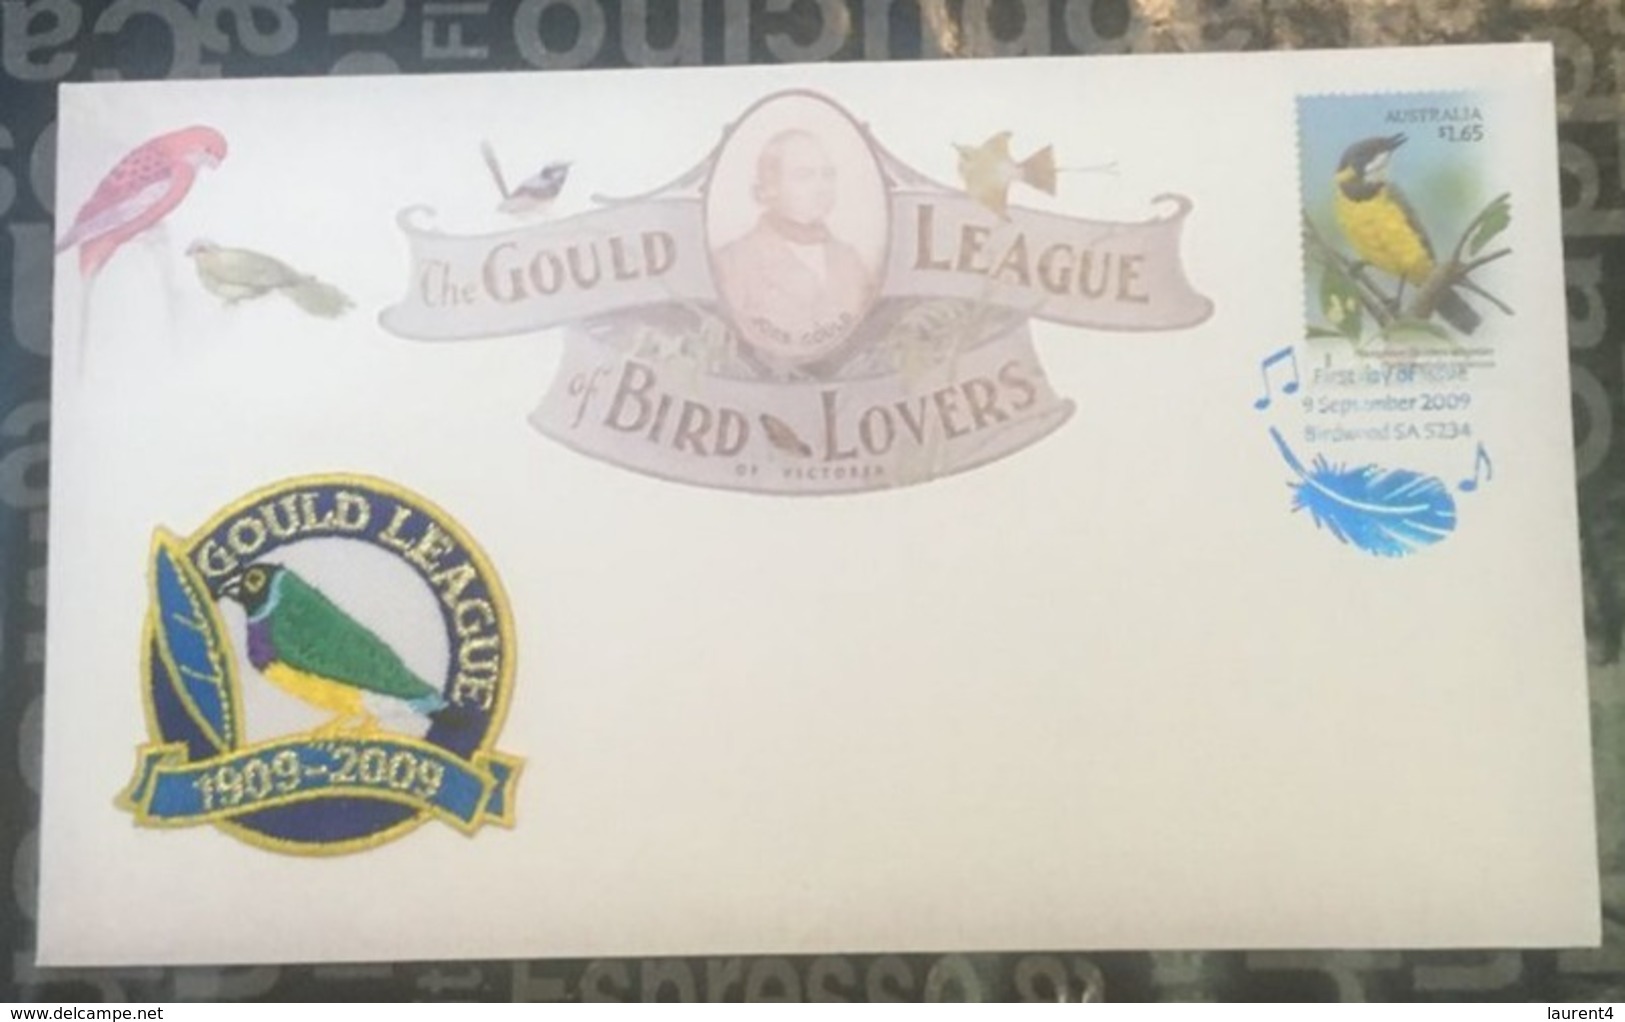 (Special - 4-8-2020) Australia - 2009 - Gould League Of Bird Lovers  - Australia Special Cover (RRP $ 9.95) Nº 00910 - Oblitérations & Flammes